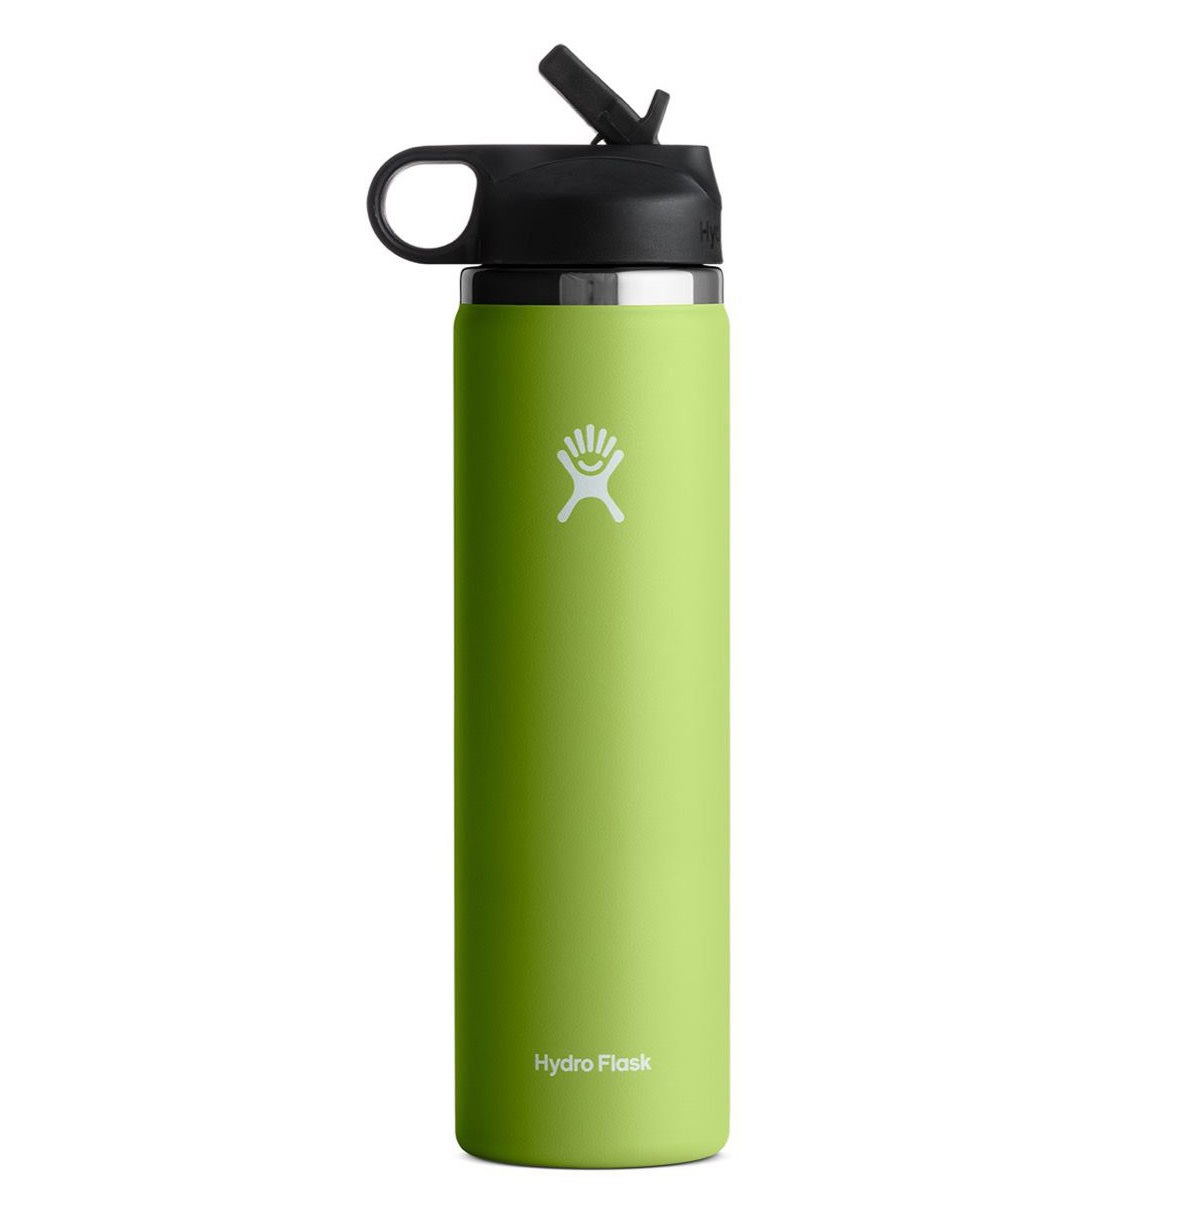 Hydro Flask 24 oz Wide Mouth Bottle with Straw Lid